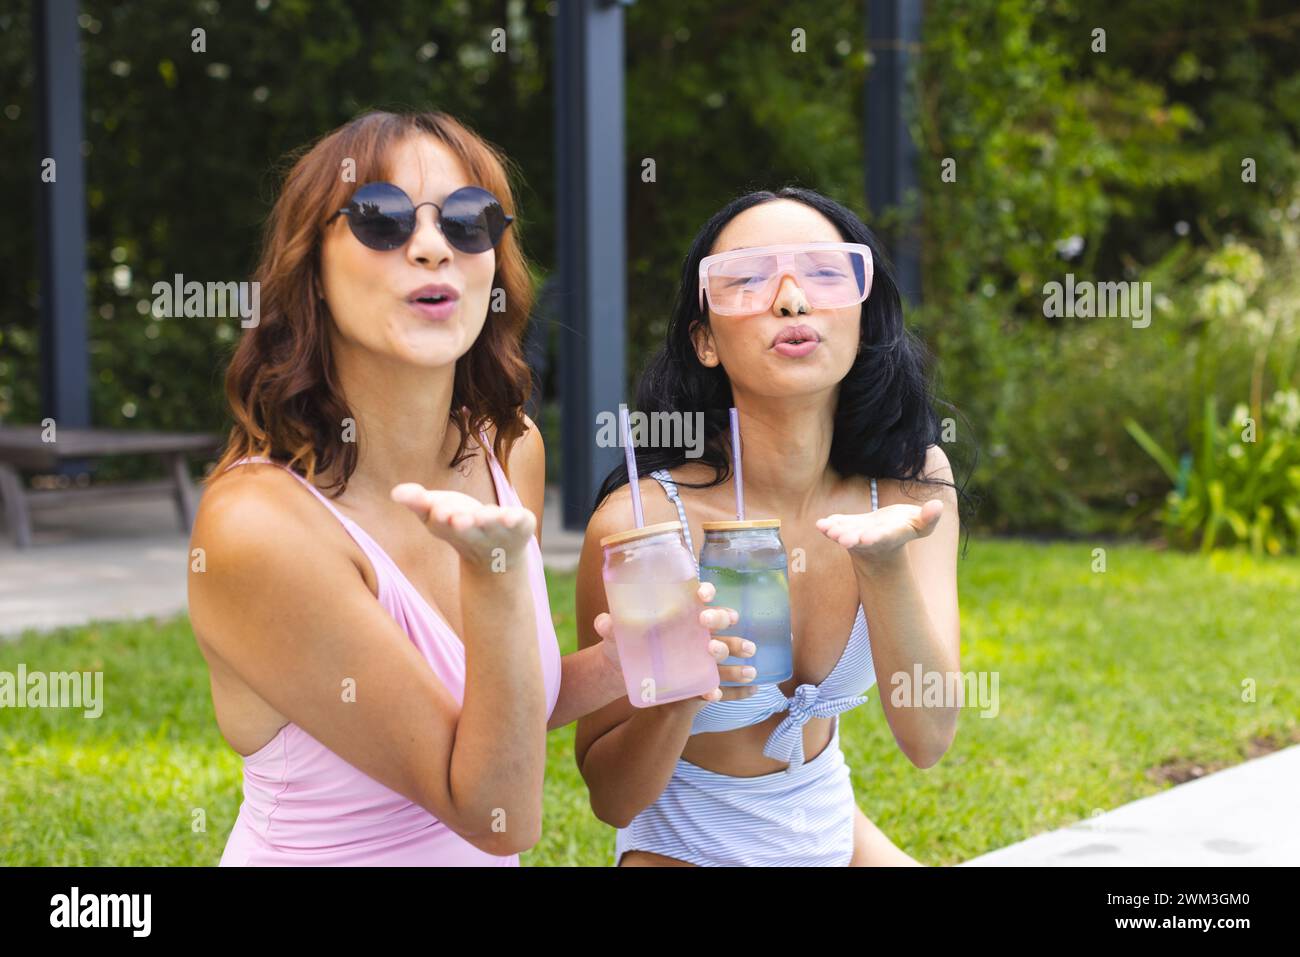 Two women enjoy a sunny day outdoors, with copy space Stock Photo